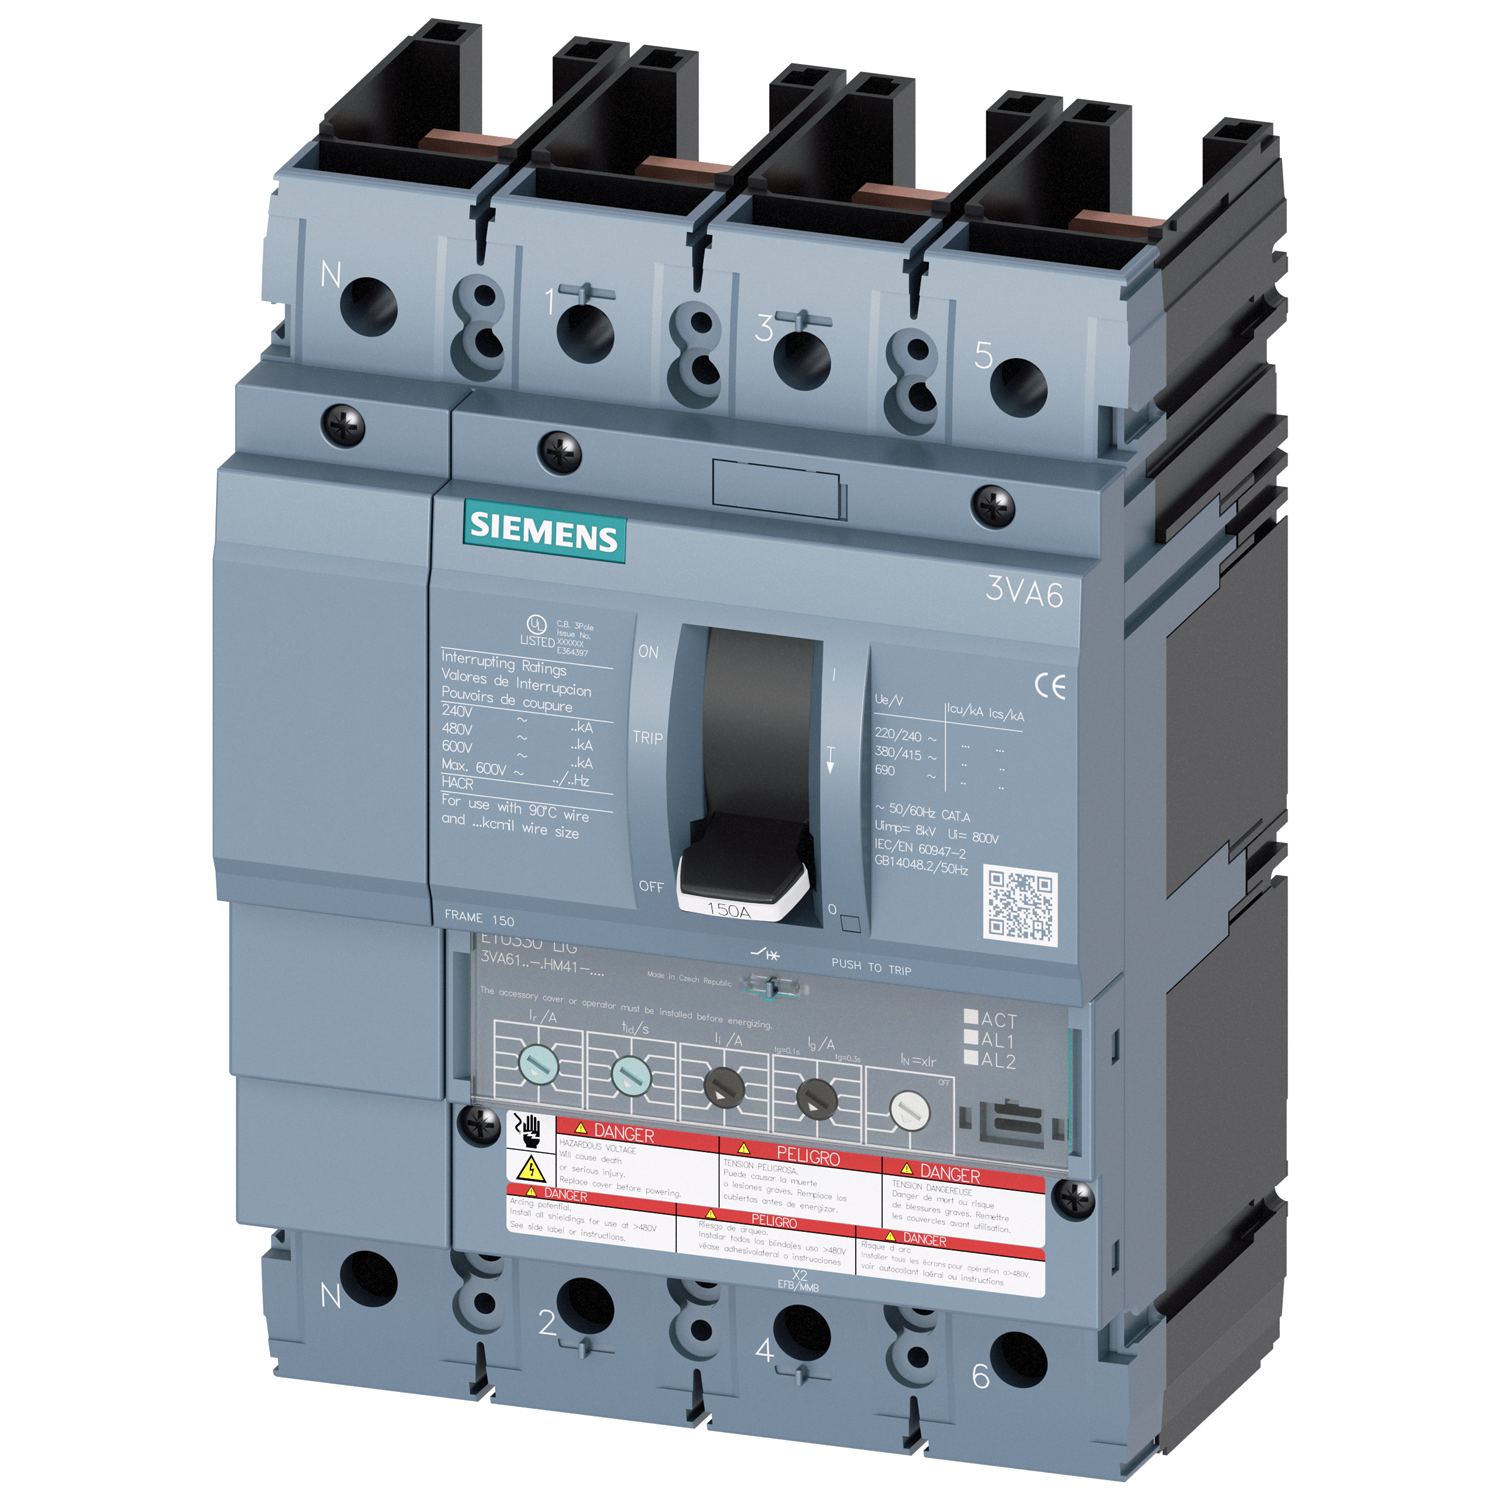 SIEMENS LOW VOLTAGE 3VA UL MOLDED CASE CIRCUIT BREAKER WITH ELECTRONIC TRIP UNIT. 3VA61 FRAME WITH VERY HIGH (CLASS C) BREAKING CAPACITY. 150A 4-POLE (35KAIC AT 600V) (100KAIC AT 480V). ETU330 TRIP UNIT LIG. SPECIAL FEATURES WITHOUT LUGS 100 PERCENT RATED. DIMENSIONS (W x H x D) IN 5.5 x 7.8 x 4.2.